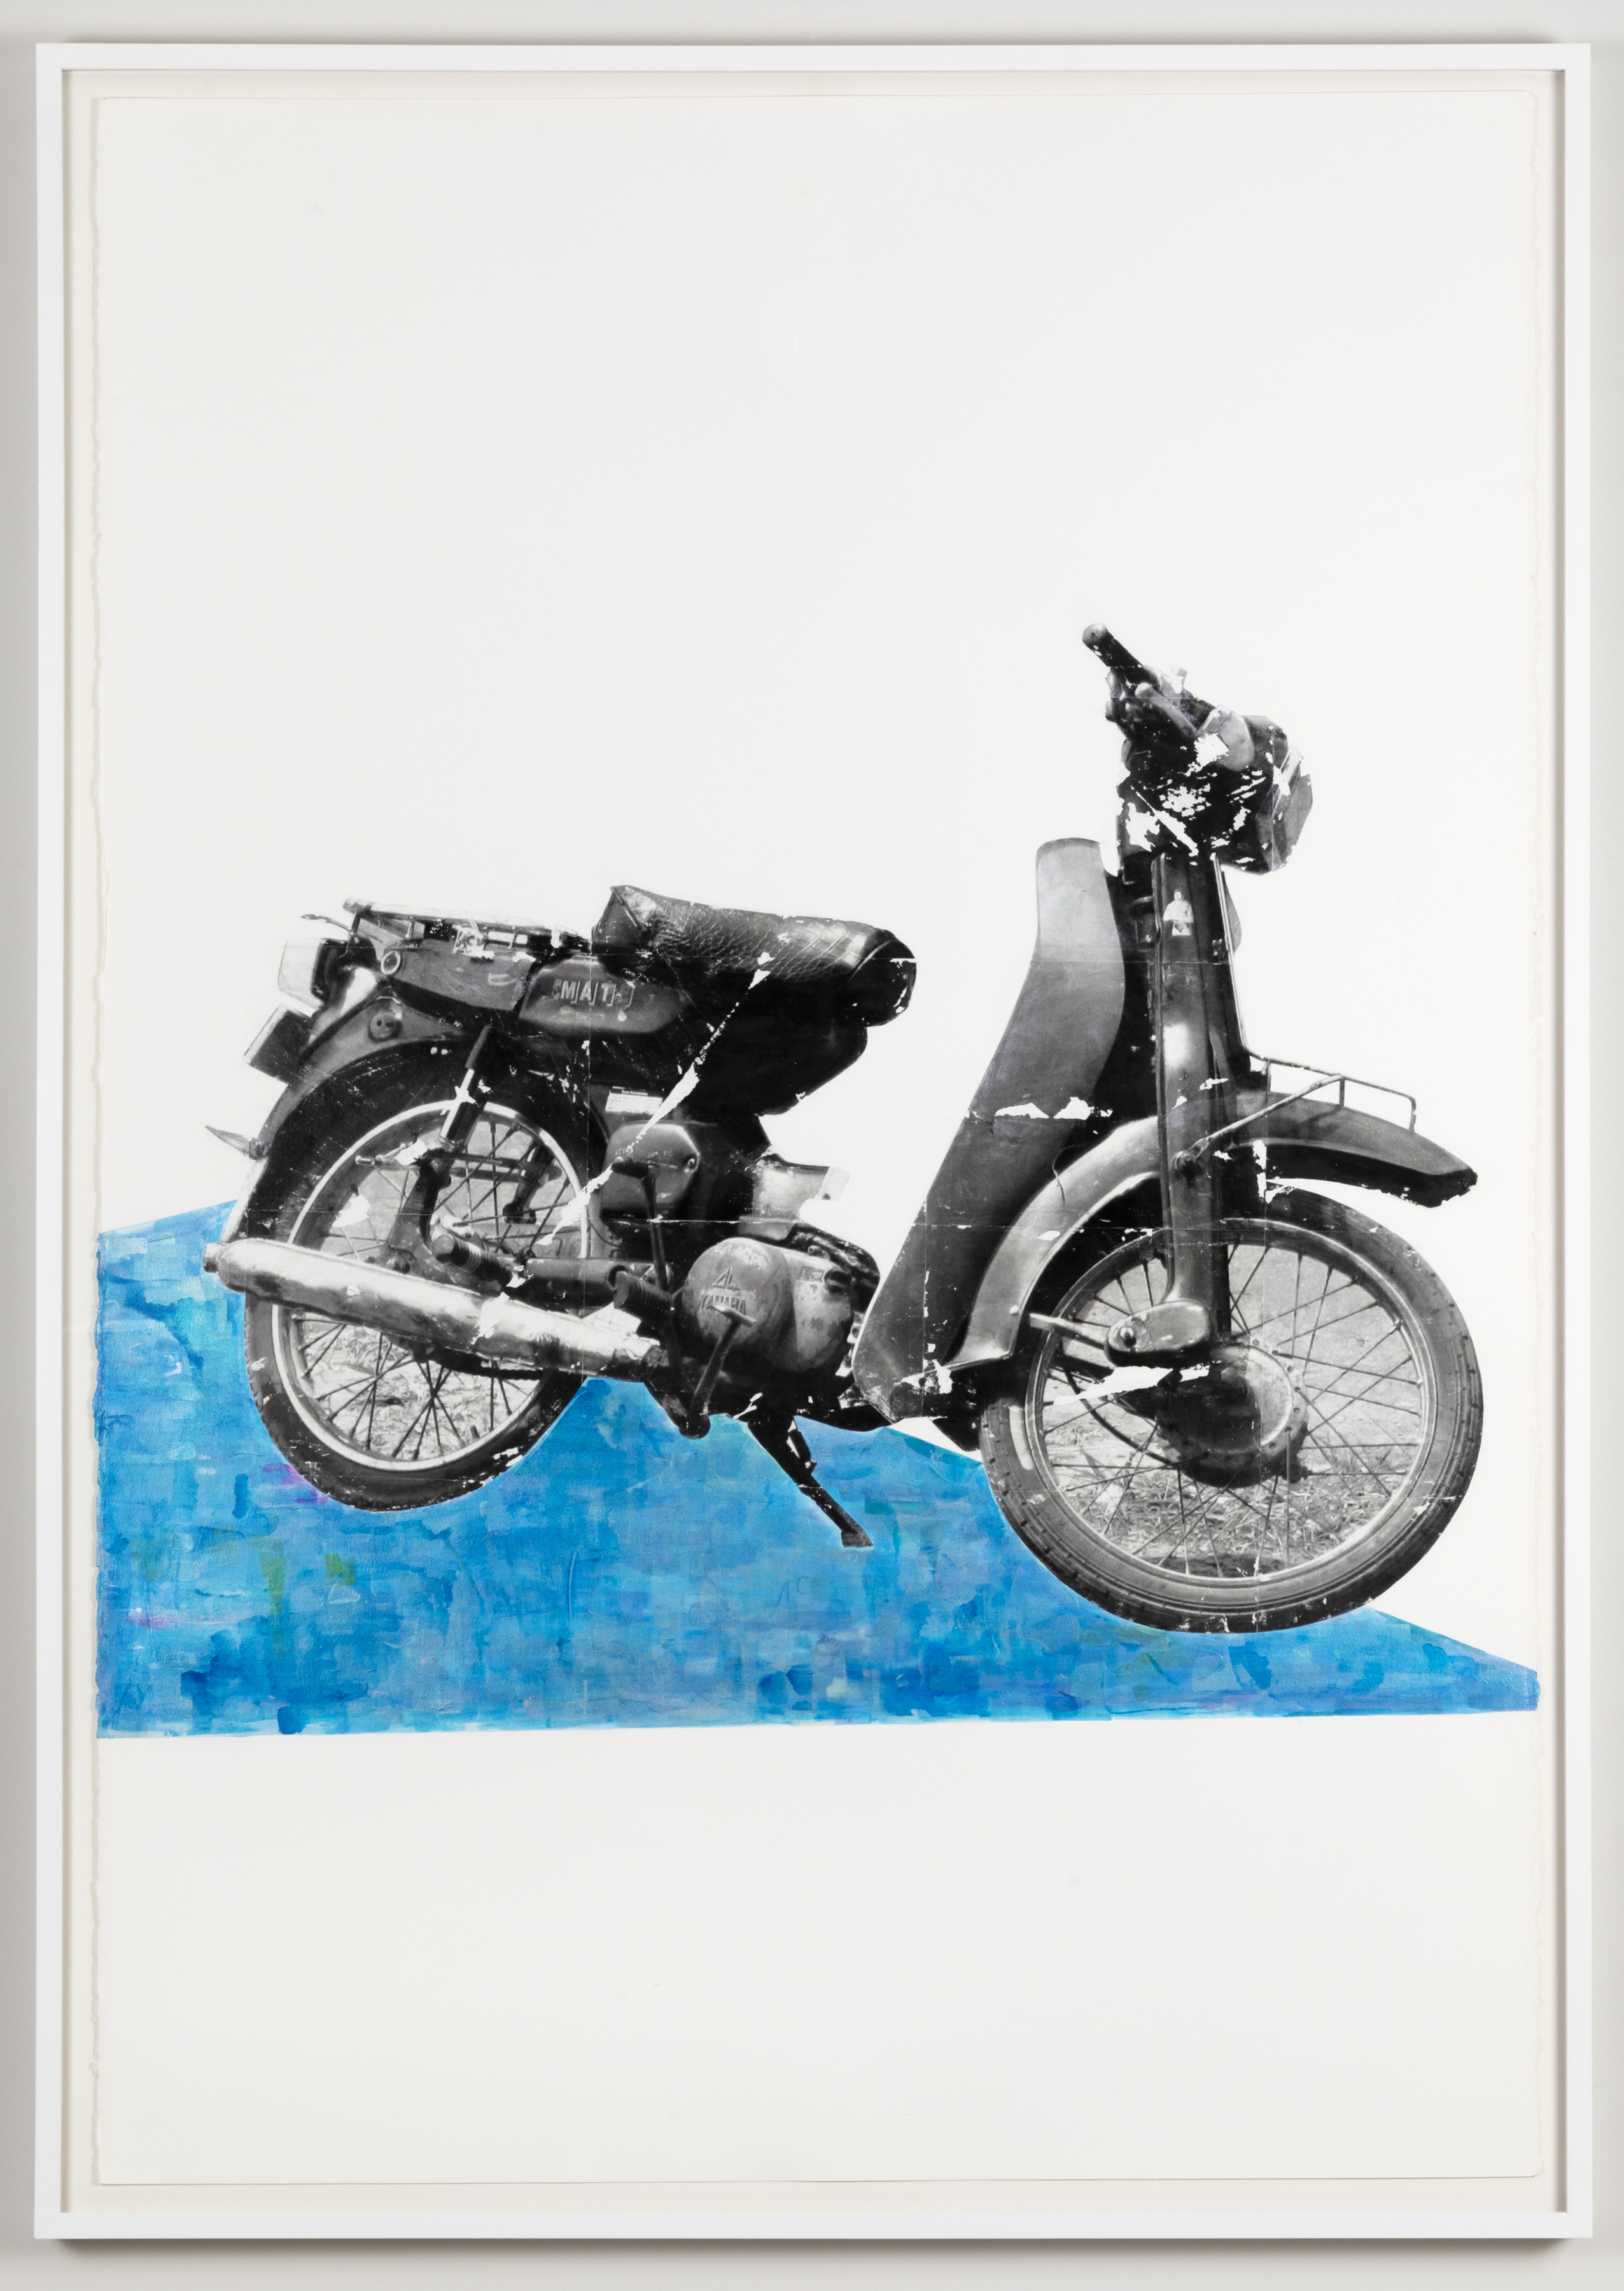 a Motorcycle + a Pool

2020
Phototransfer and ink

101.6 x 152.4 cm / 40 x 60 in.